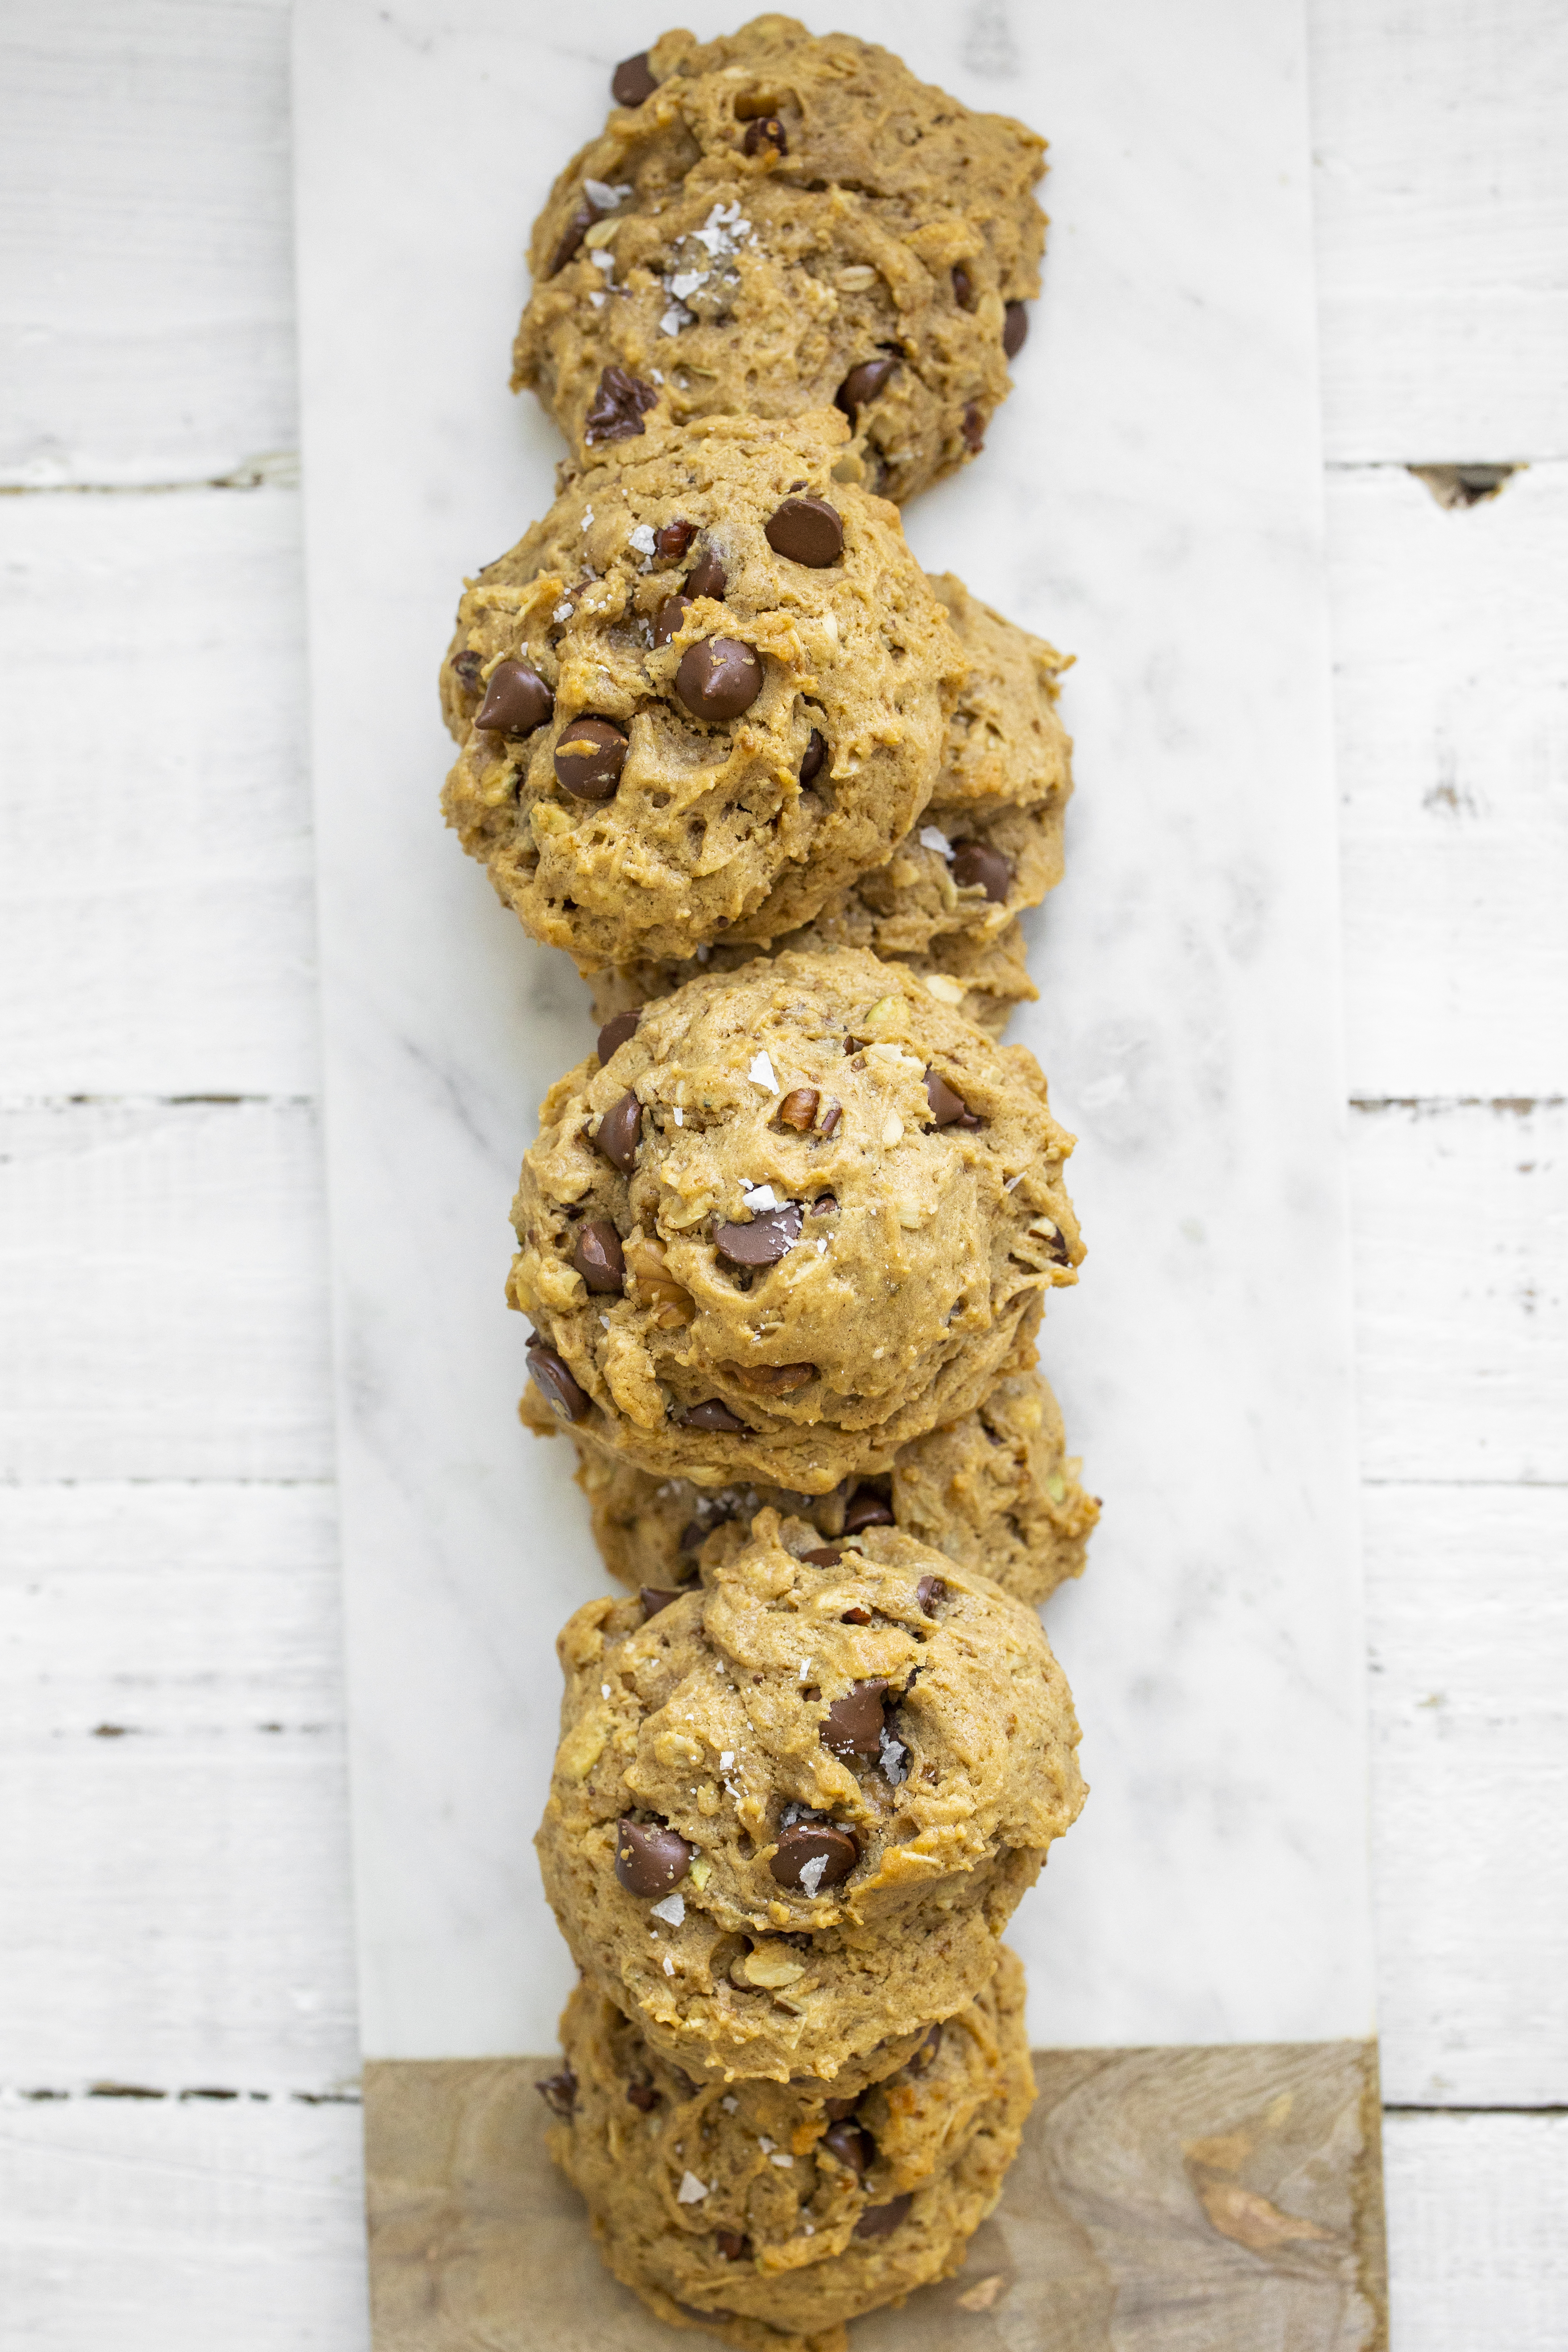 https://healthyhappylife.com/wp-content/uploads/2020/11/EVERYTHING-DOUBLE-SCOOP-COOKIES-0V9A6862.jpg